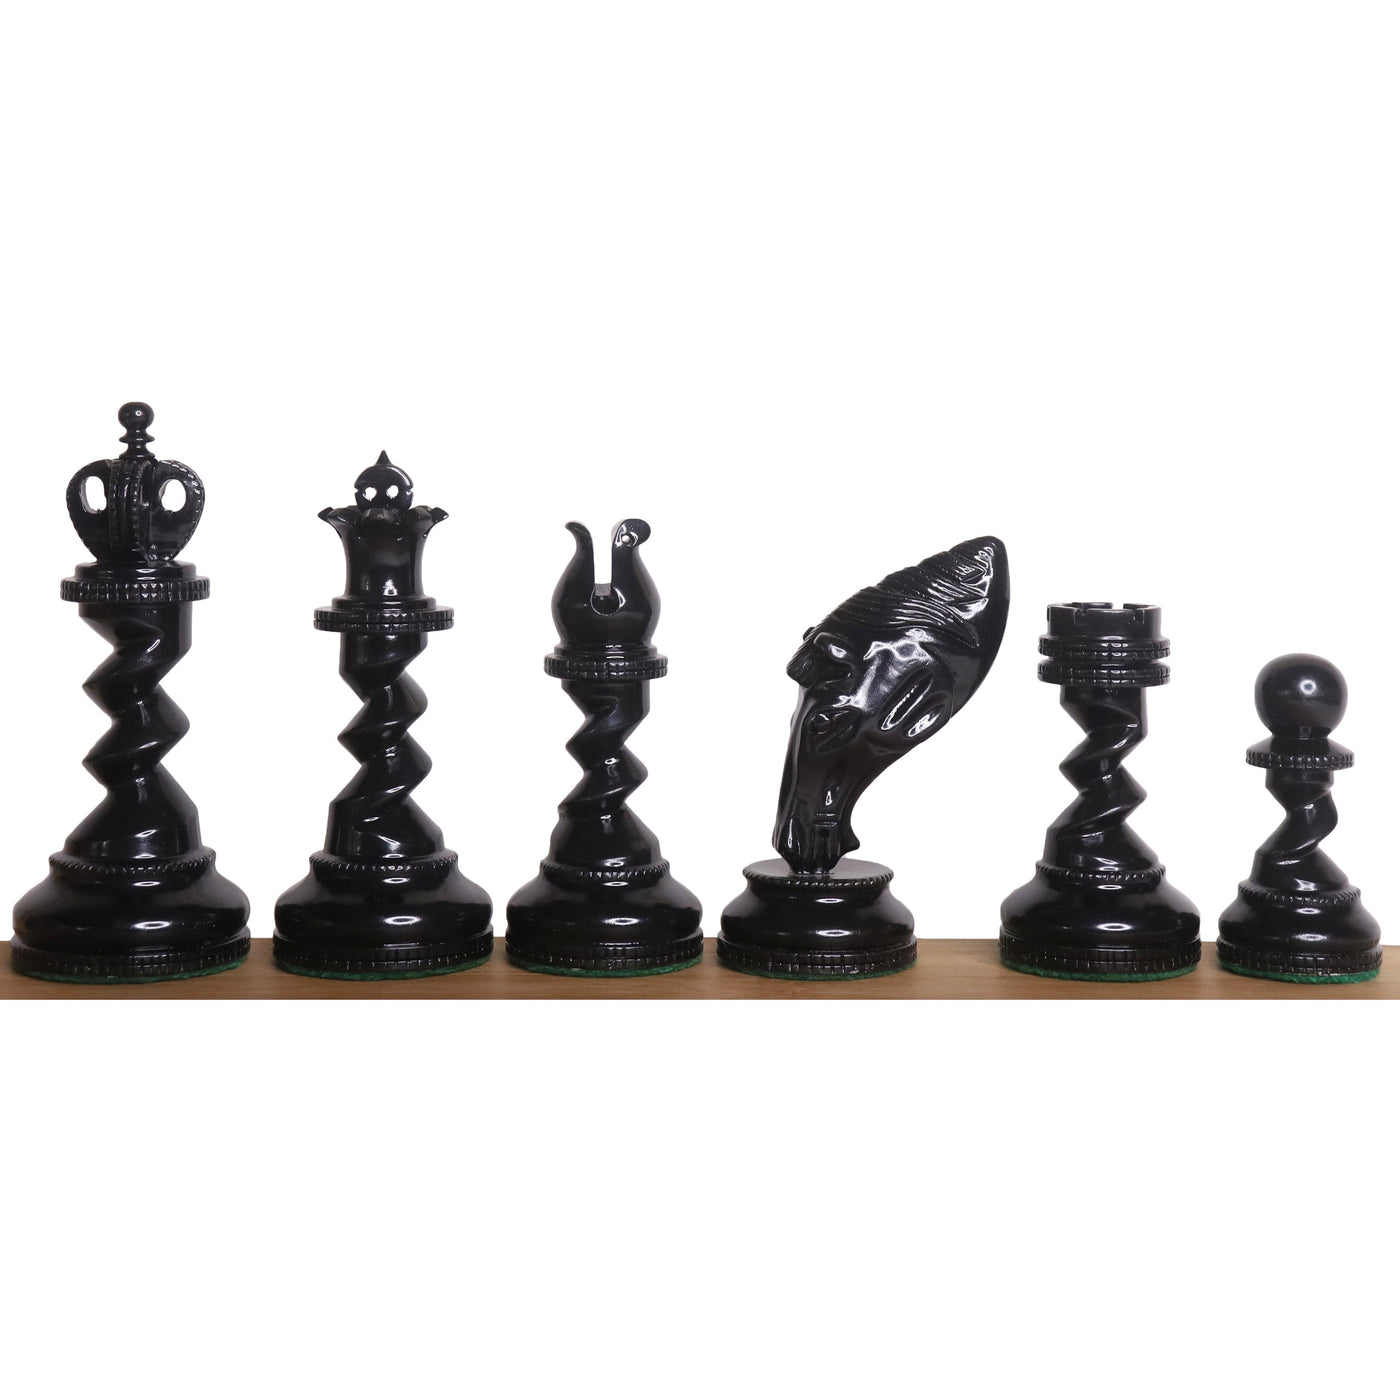 4.3" Grazing Knight Luxury Staunton Chess Set - Chess Pieces Only-Lacquered Ebony Wood